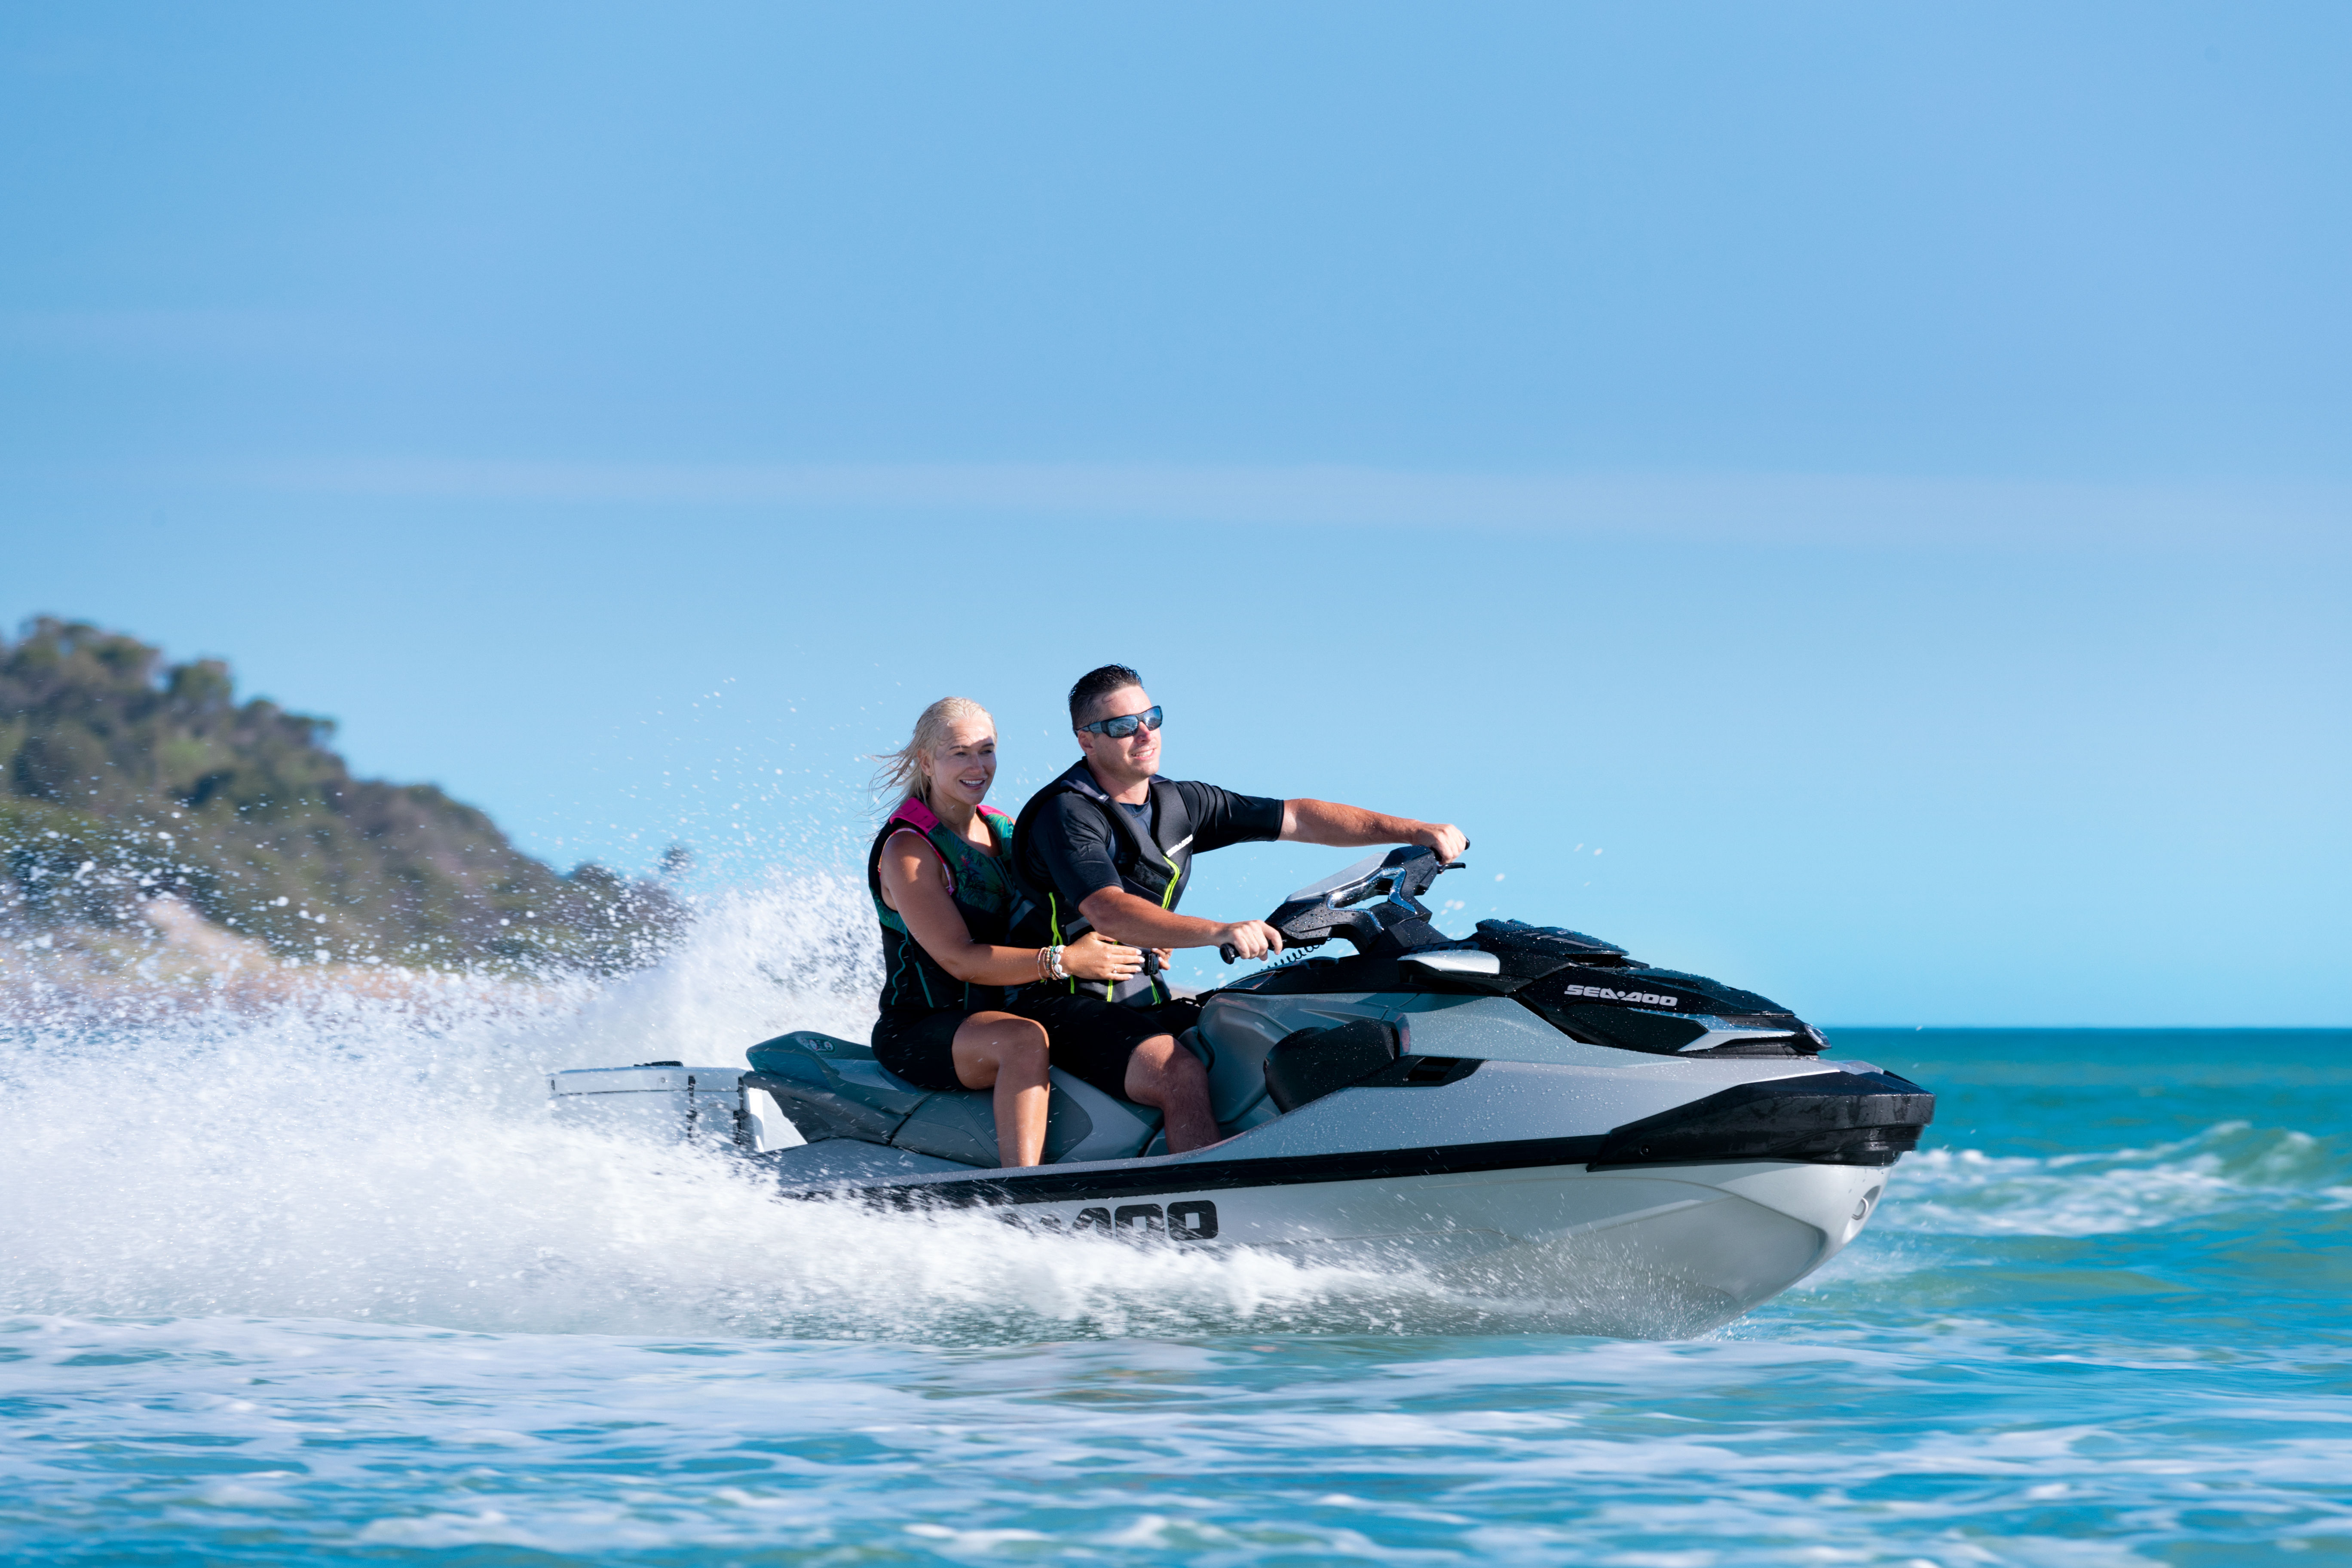 TAKE ADVANTAGE OF LOCKDOWN AND GIVE YOUR SEA-DOO THE TLC IT NEEDS